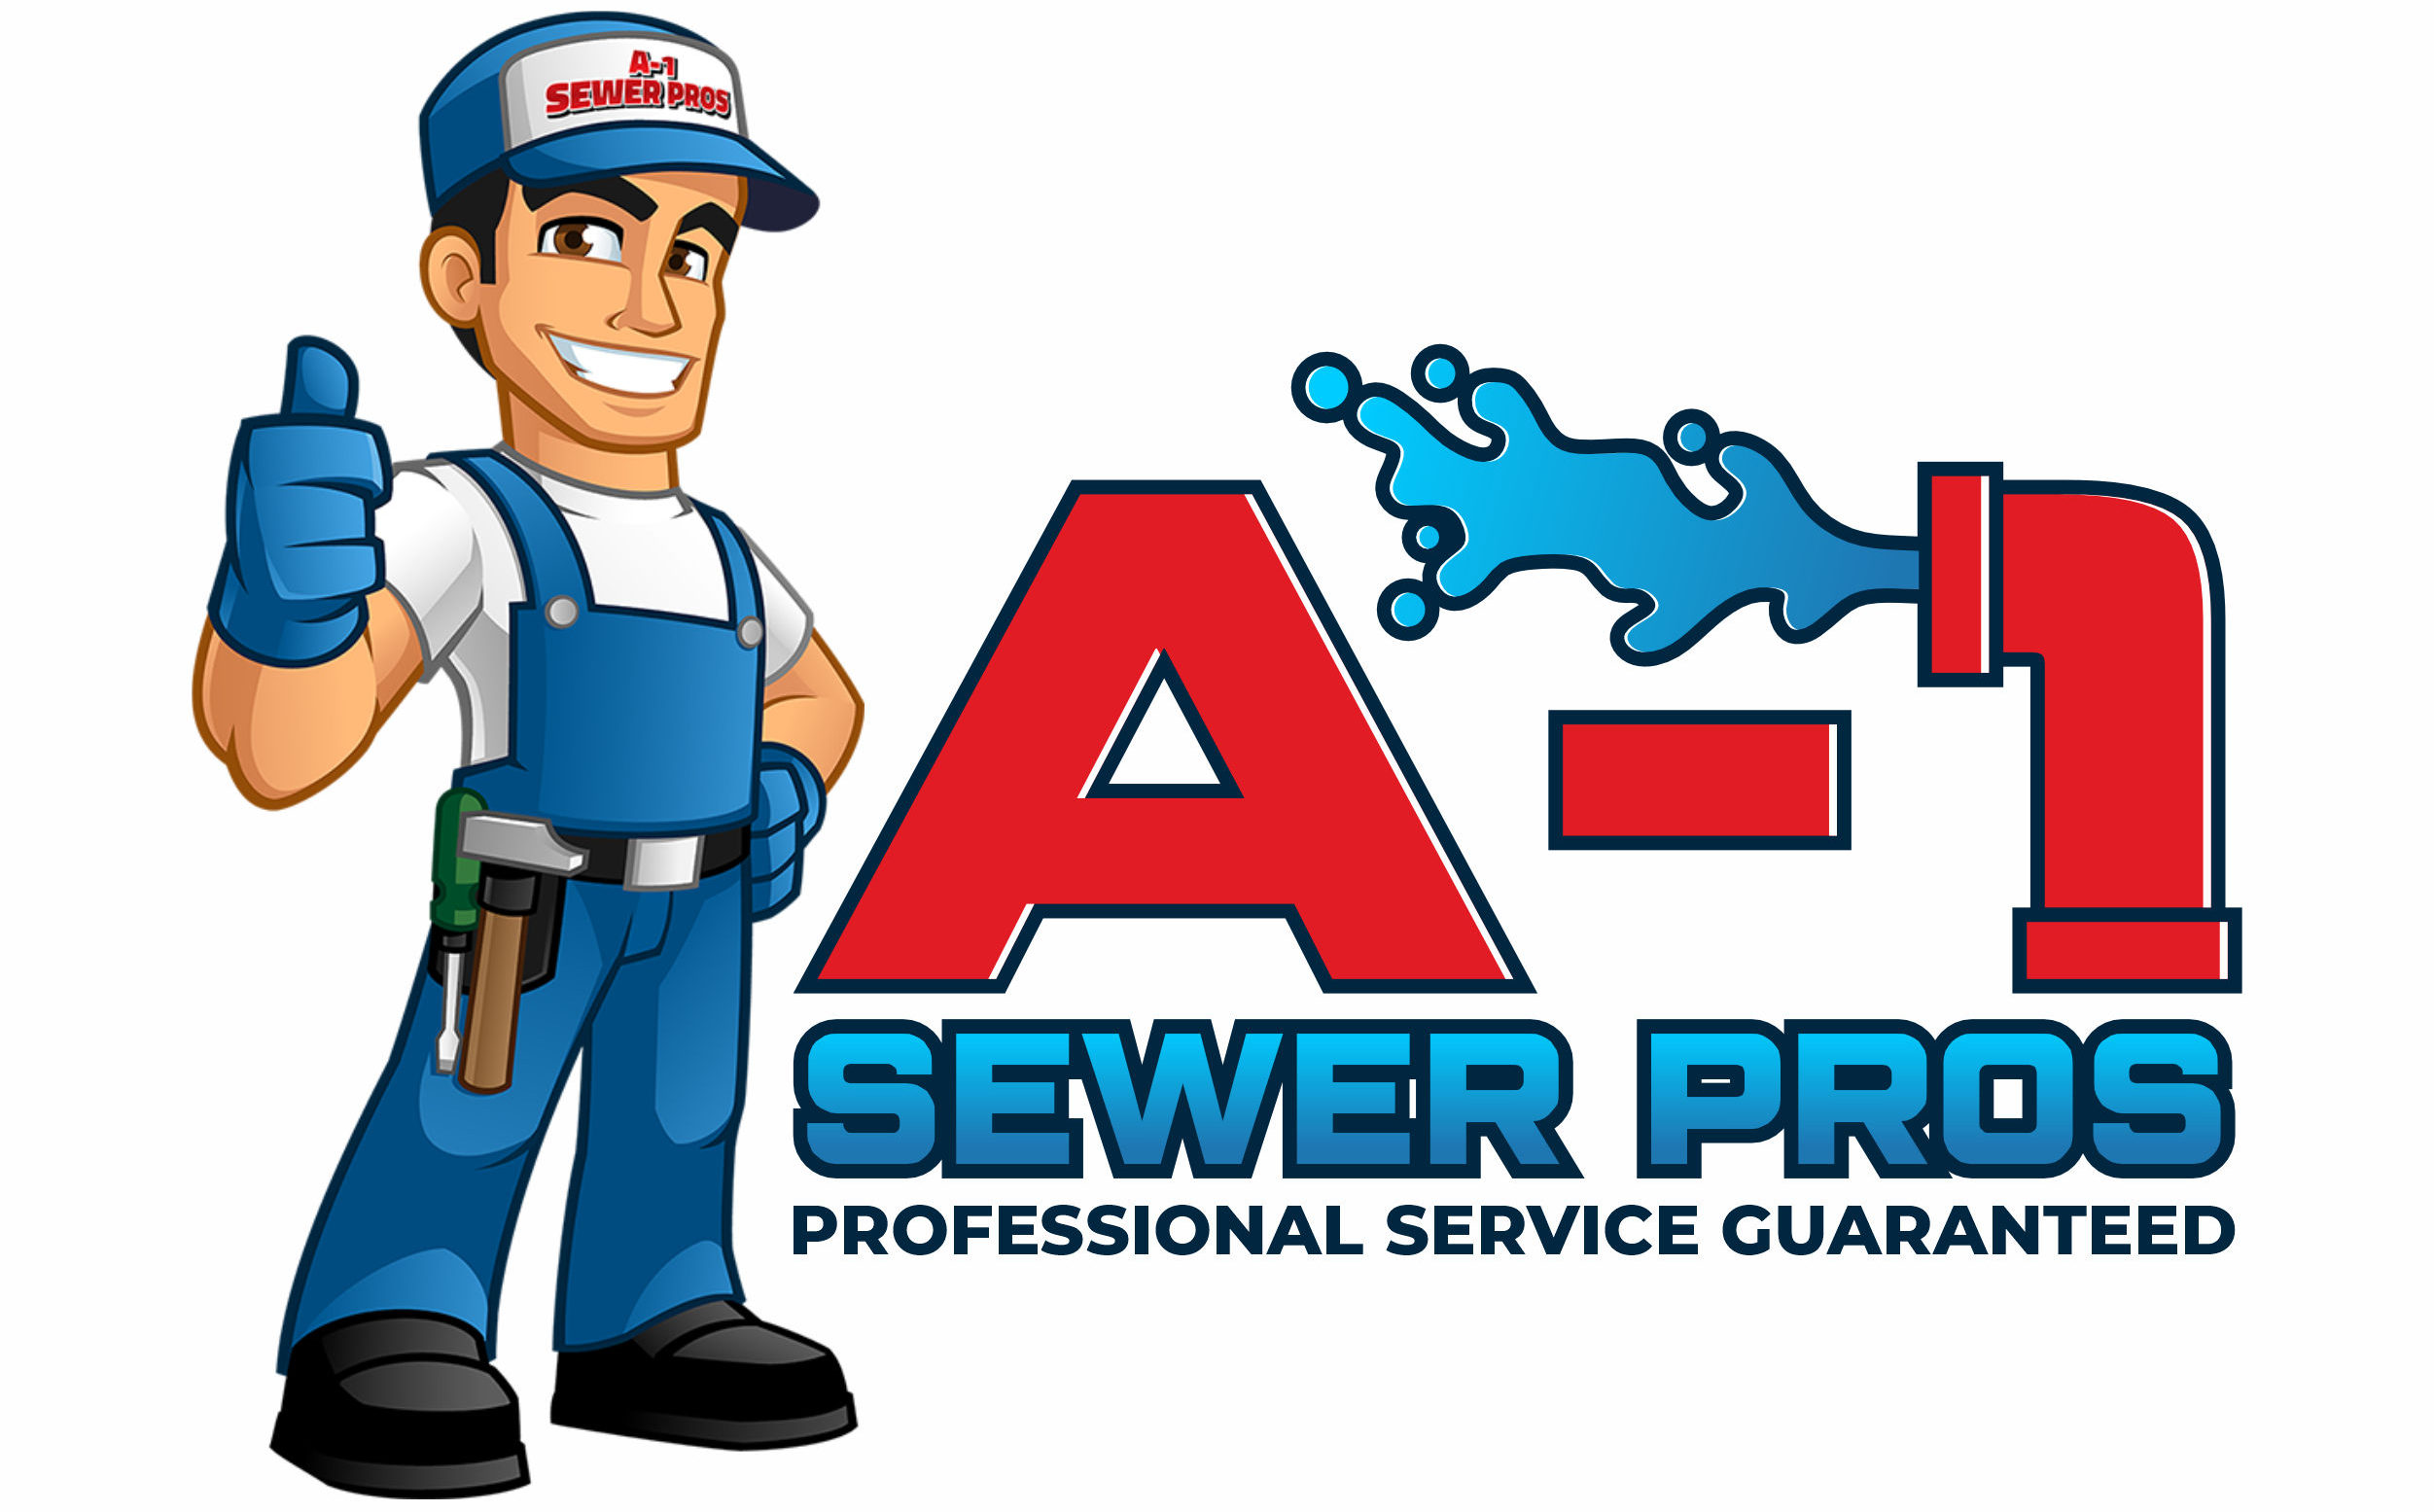 A-1 Sewer Pros